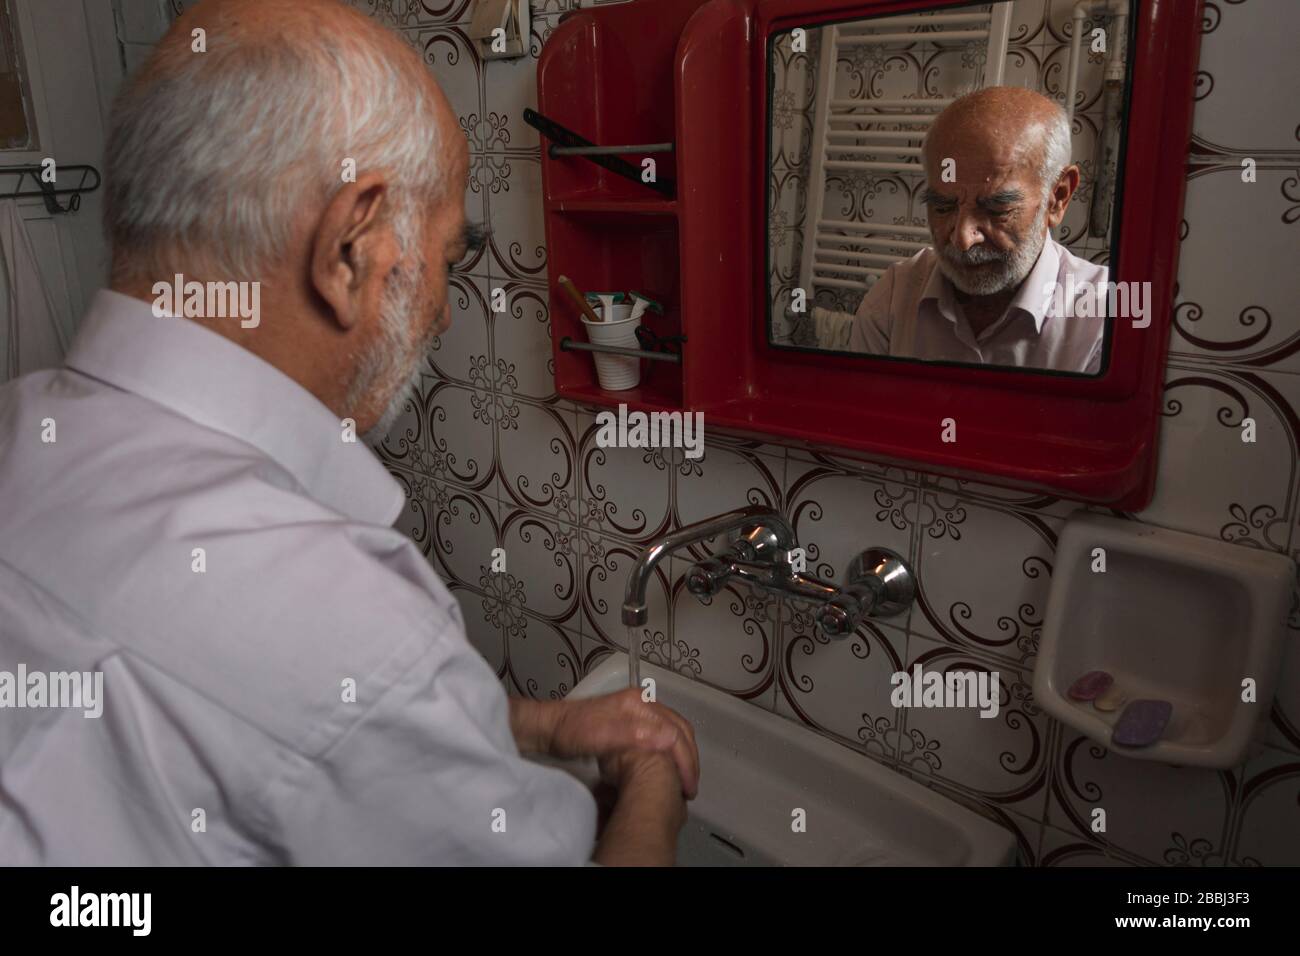 80 years old Turkish man washing his hands in front of his mirror at his retro looking bathroom Stock Photo